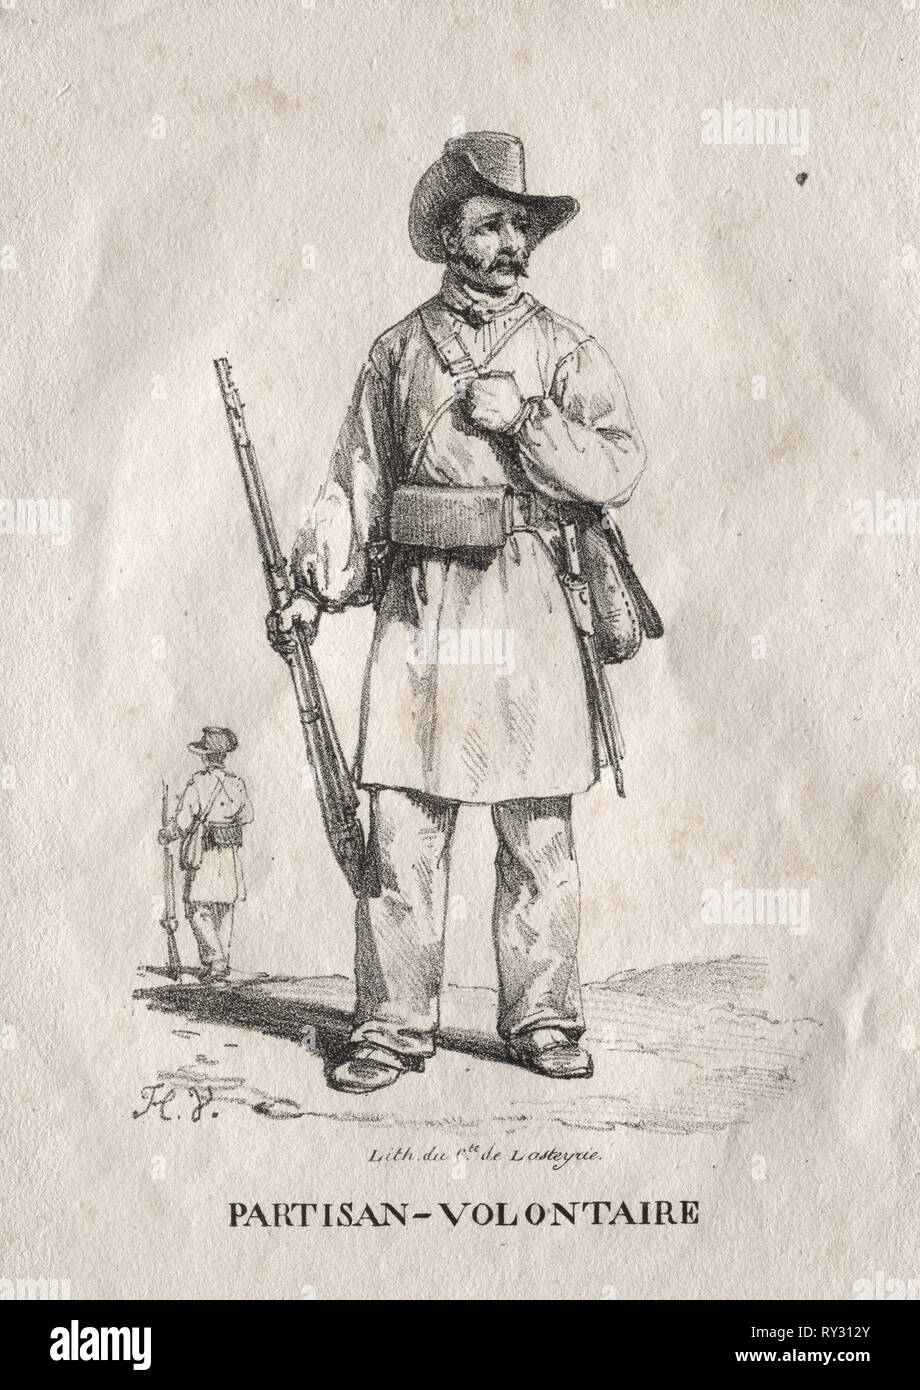 Voluntary Partisan, 1822. Horace Vernet (French, 1789-1863). Lithograph Stock Photo